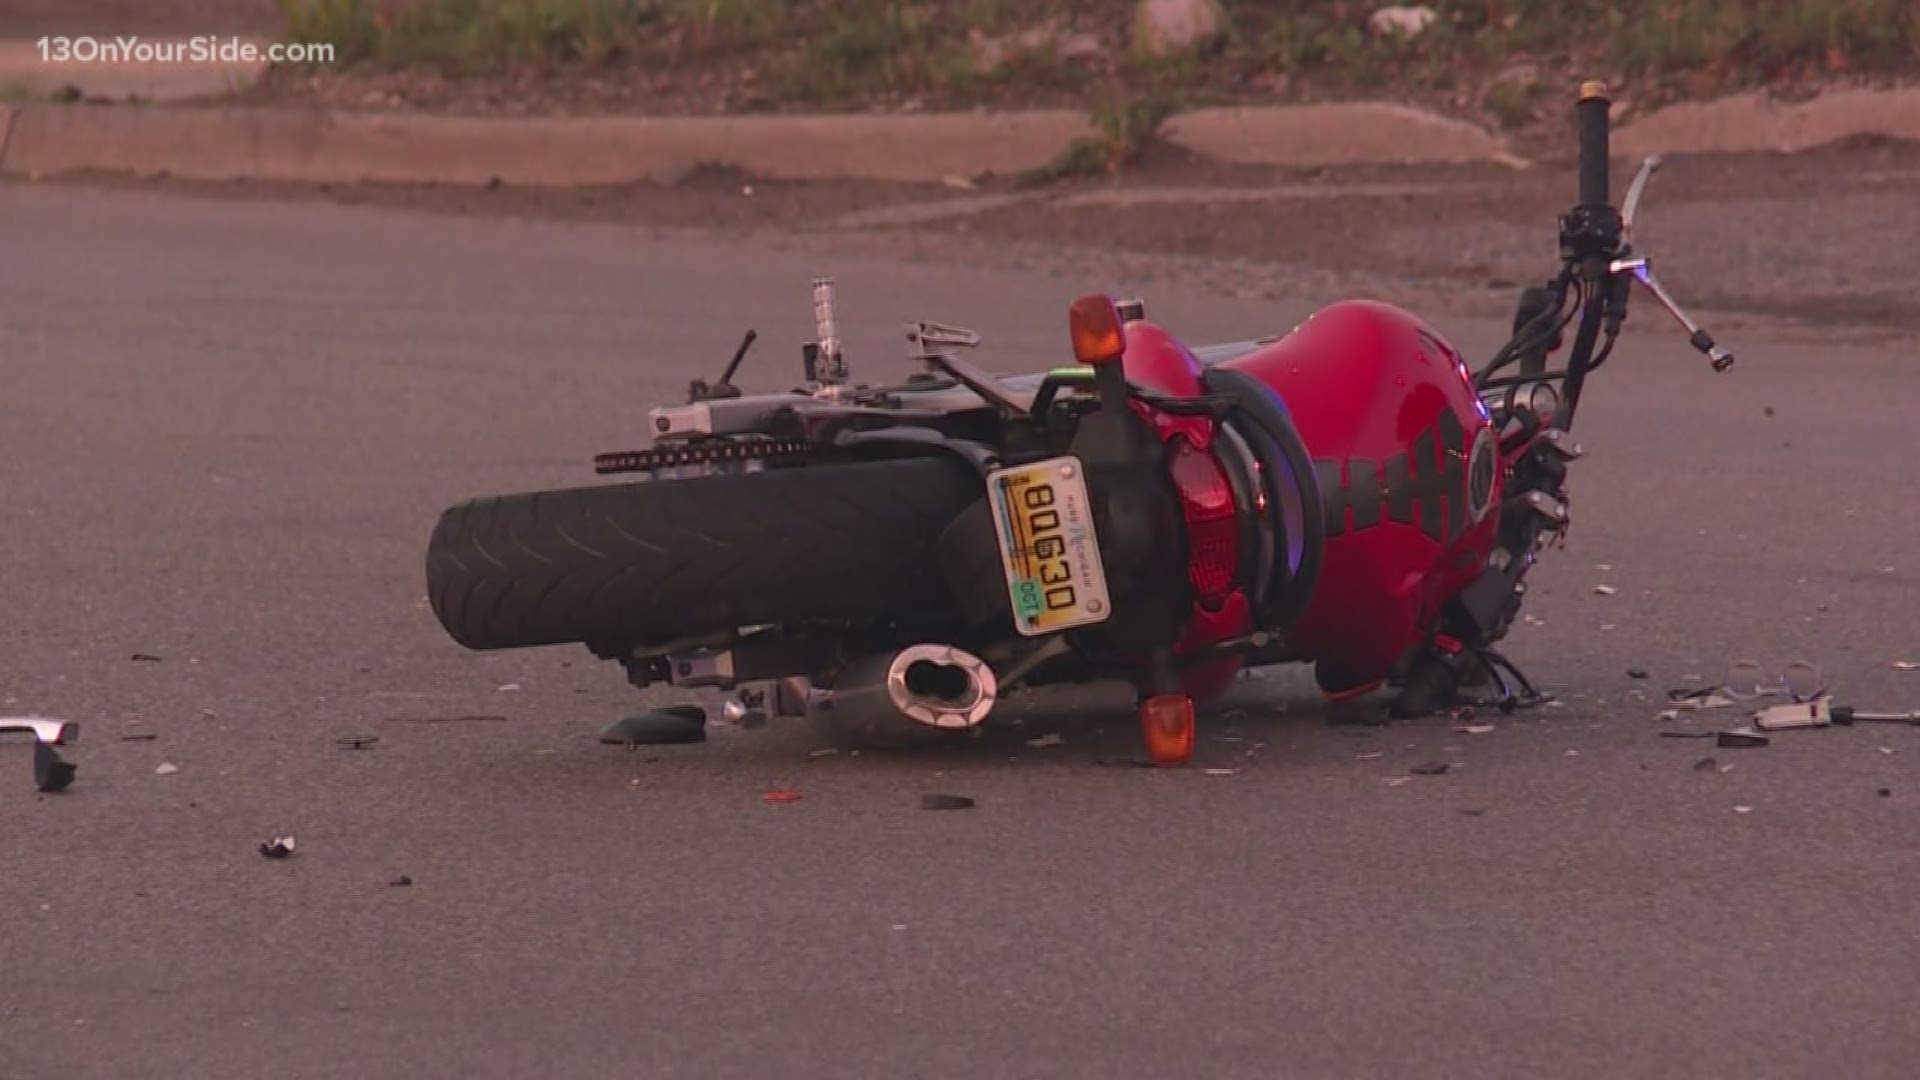 Police say the motorcyclist was going north on Turner Avenue when a 76-year-old Walker woman on Turner attempted to turn left to get on the highway. Police say her car was struck by the motorcyclist.